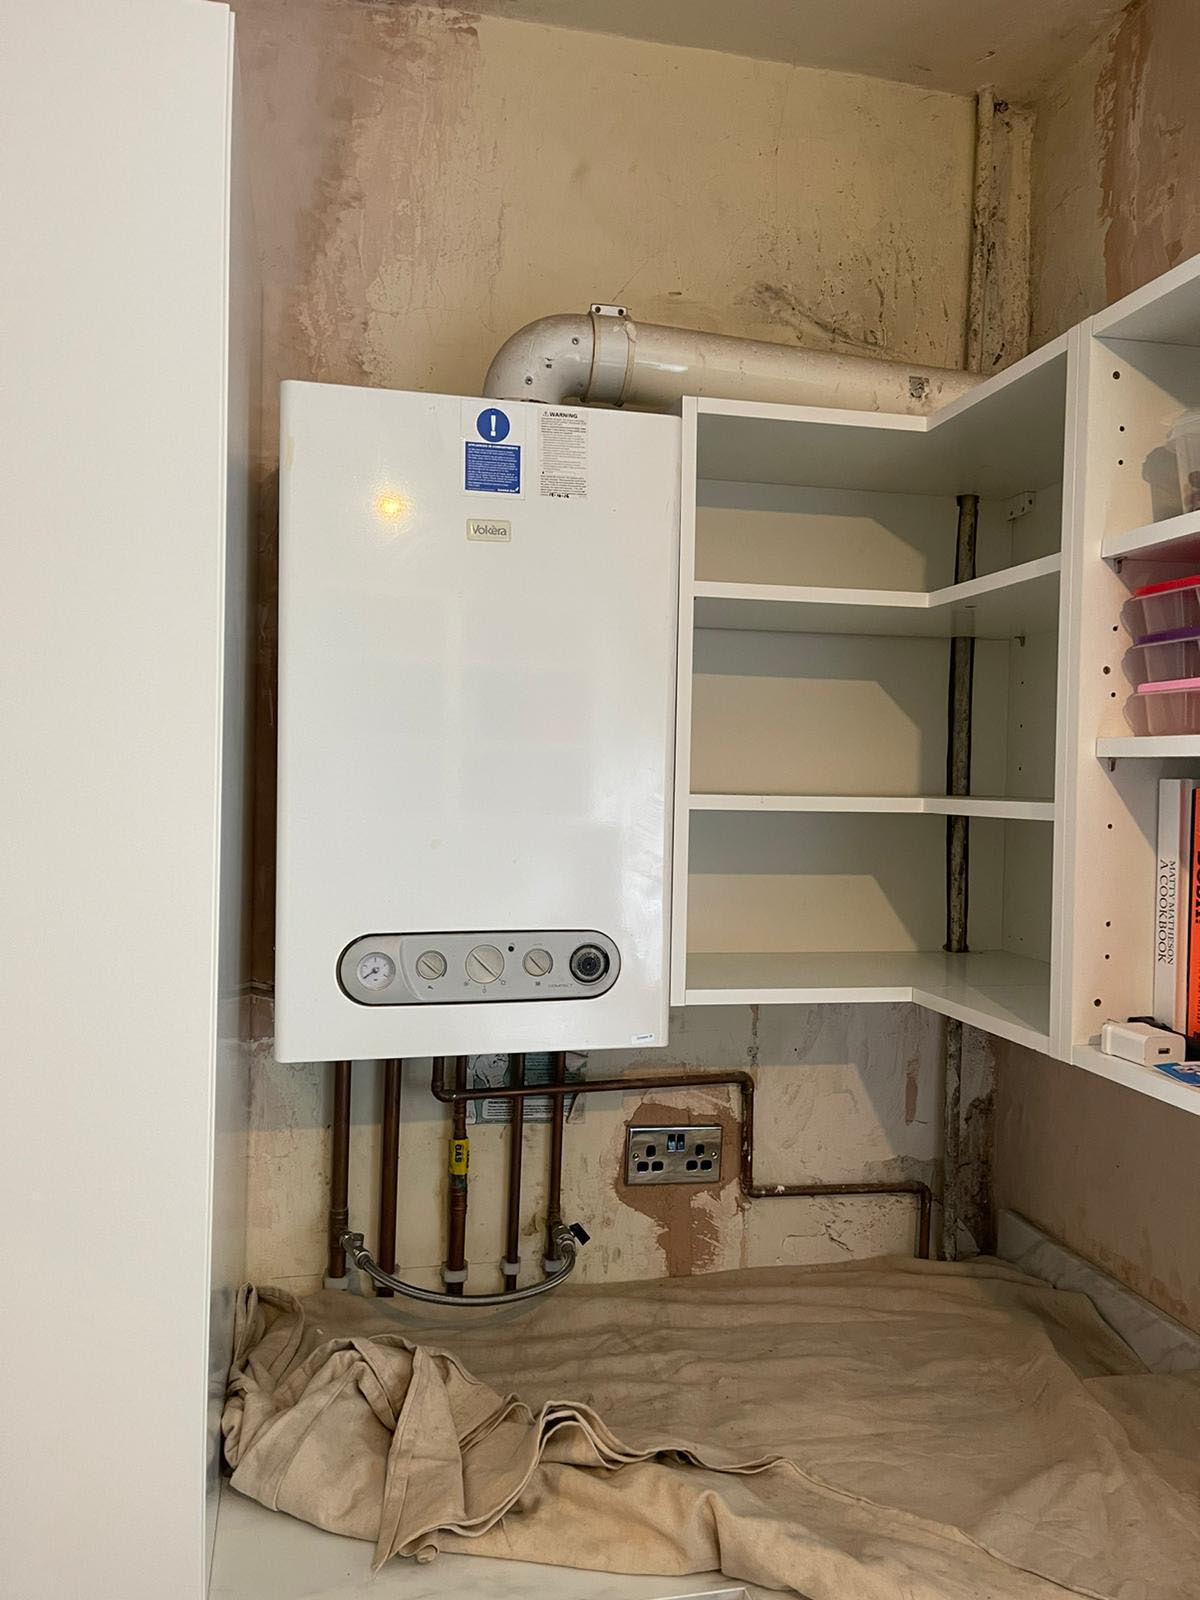 New Boiler Installation: Richardson Gas and Heating